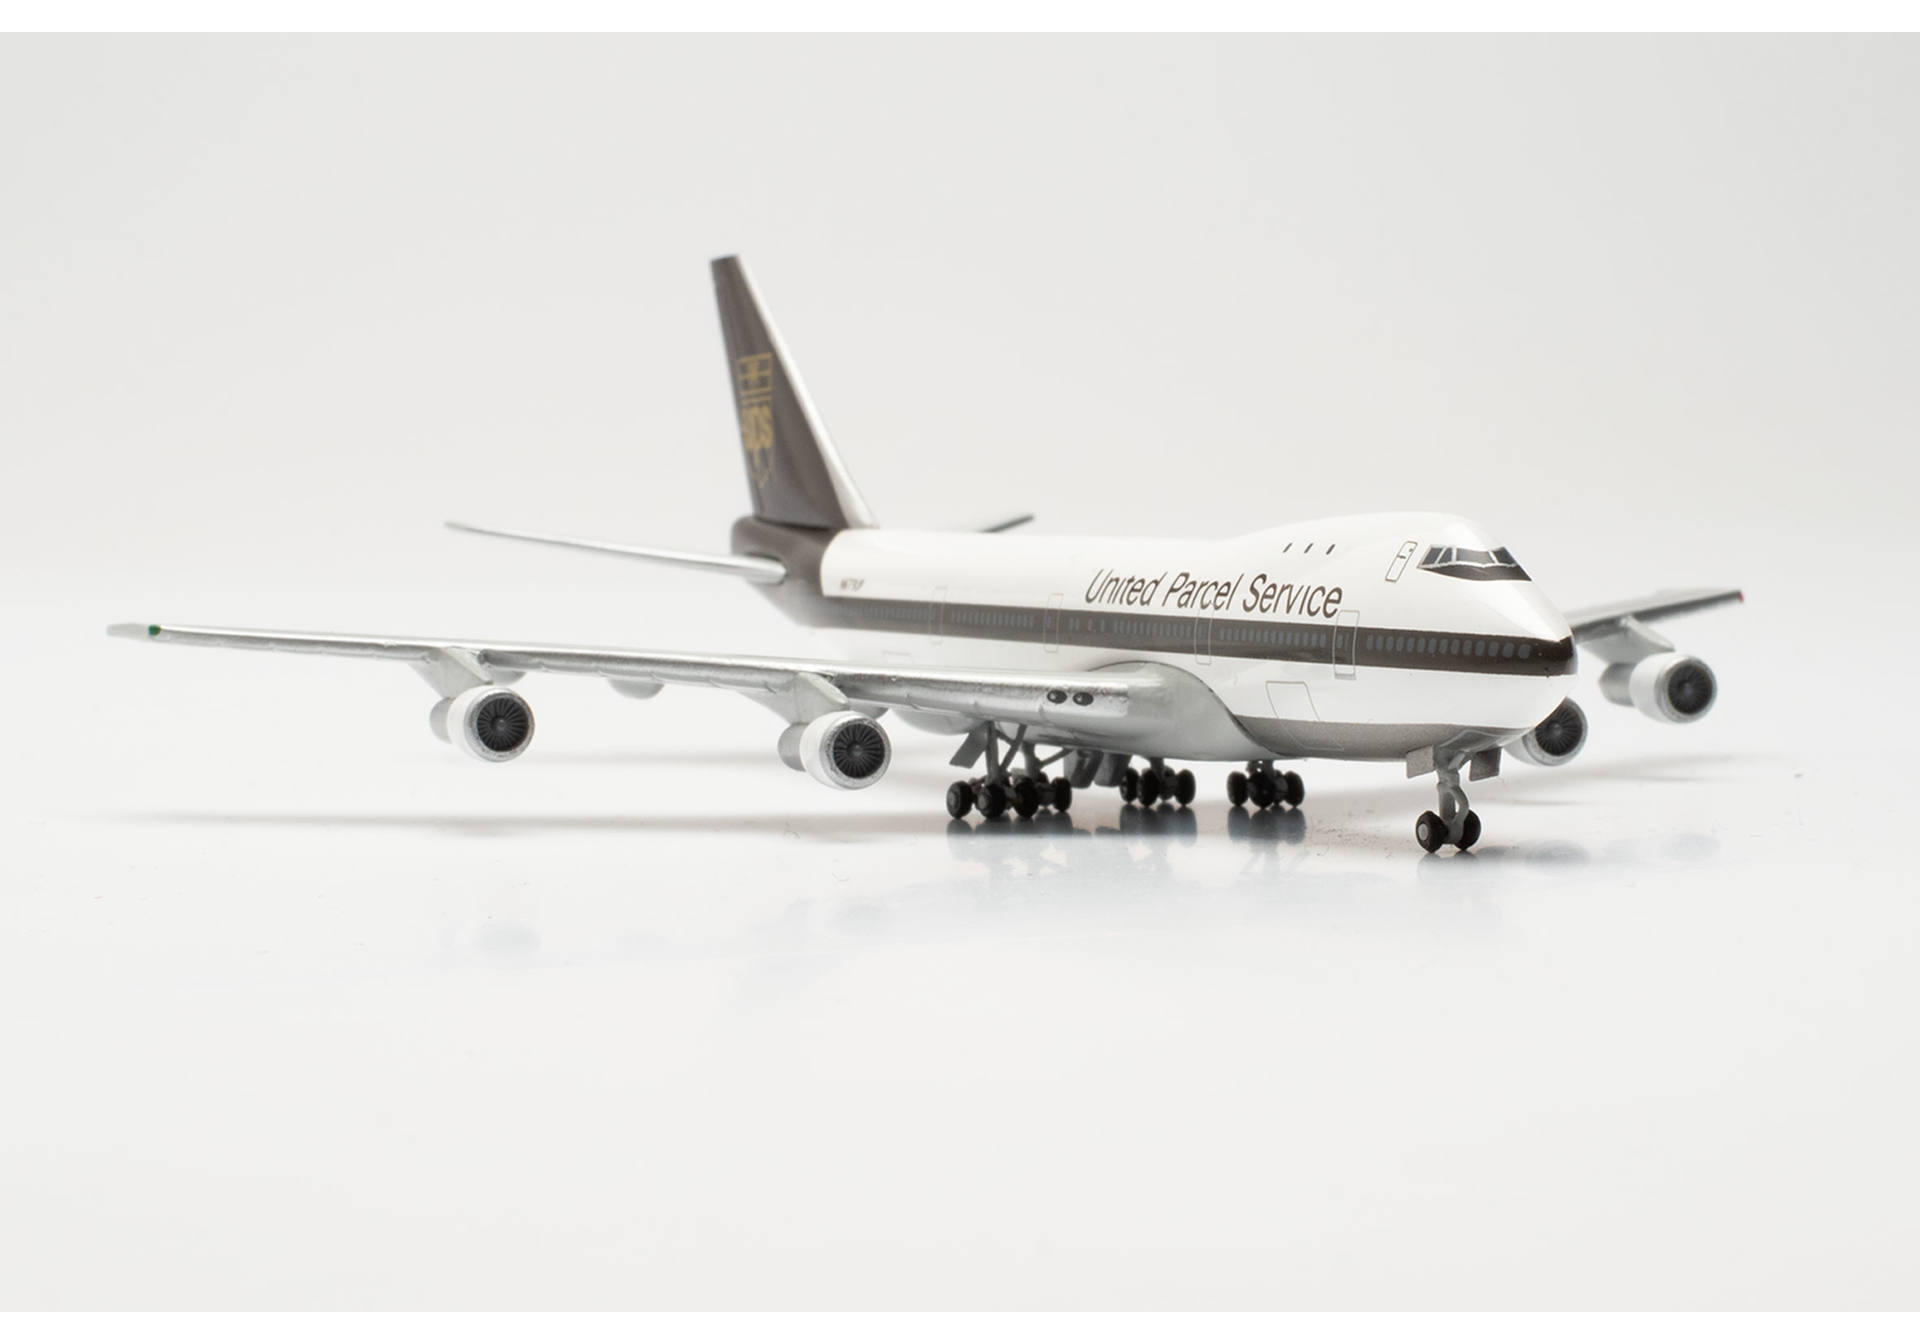 UPS AIRLINES BOEING 747-100F HERPA 1/500°